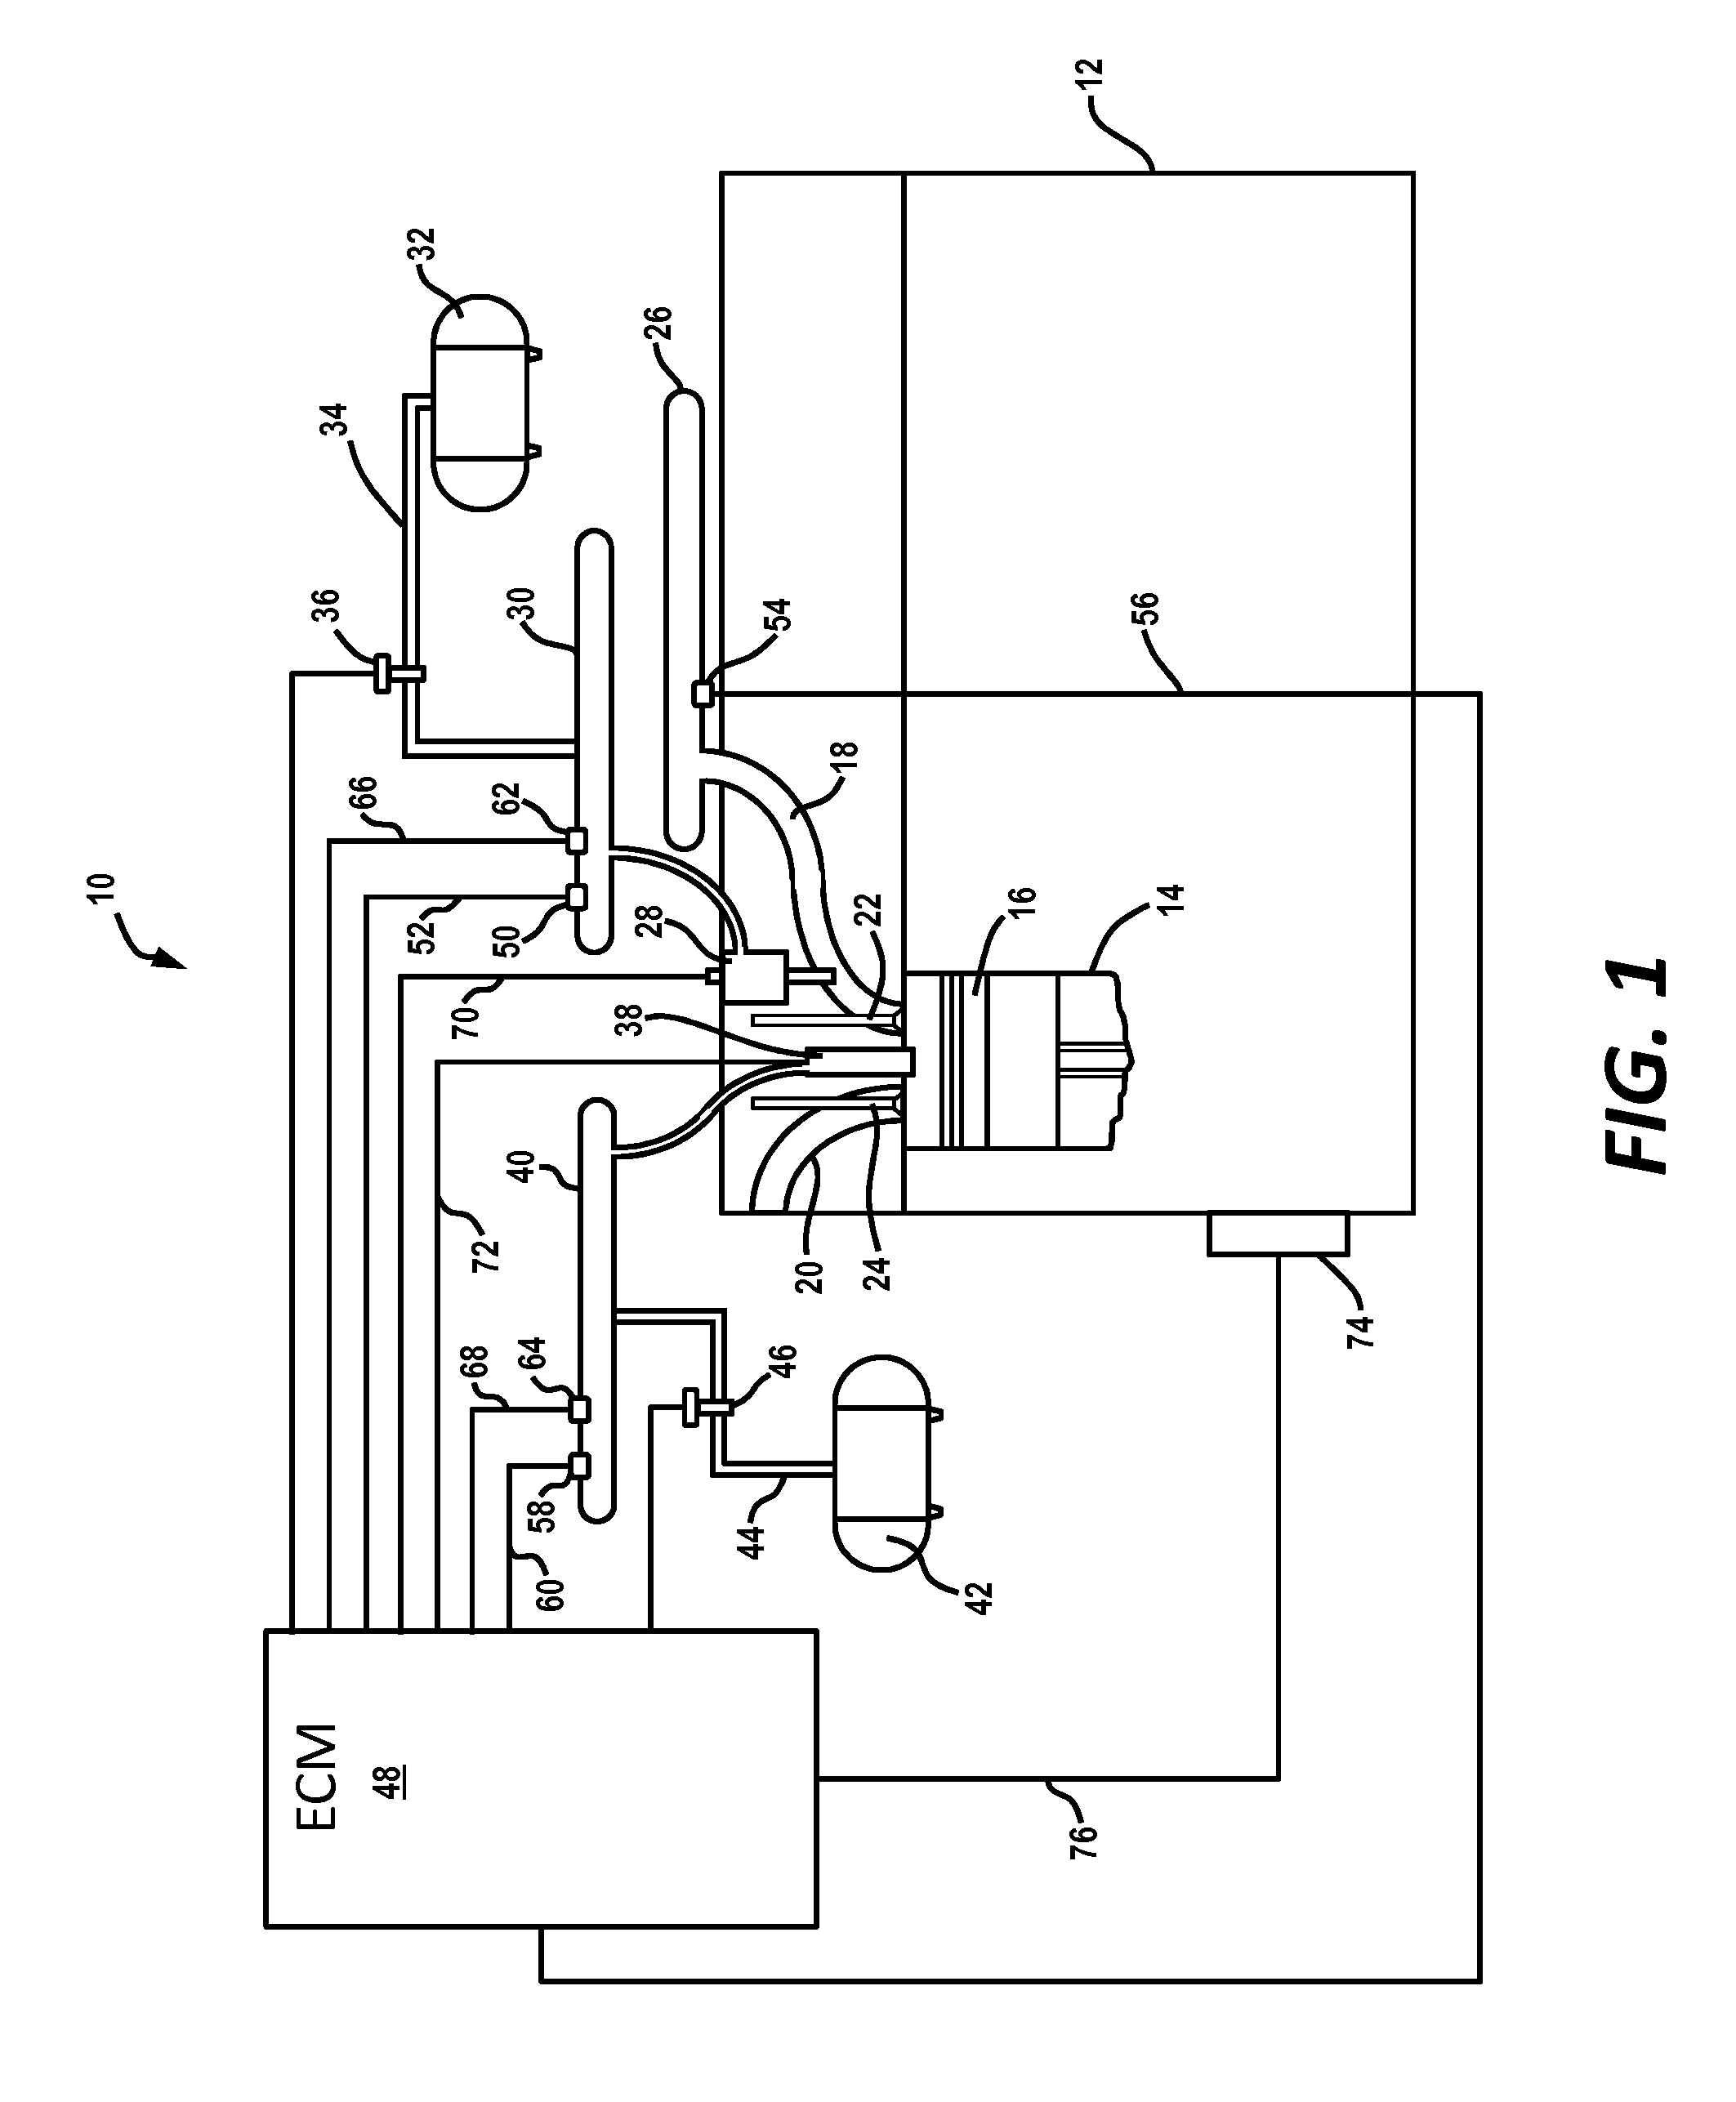 Fuel Apportionment for Multi Fuel Engine System